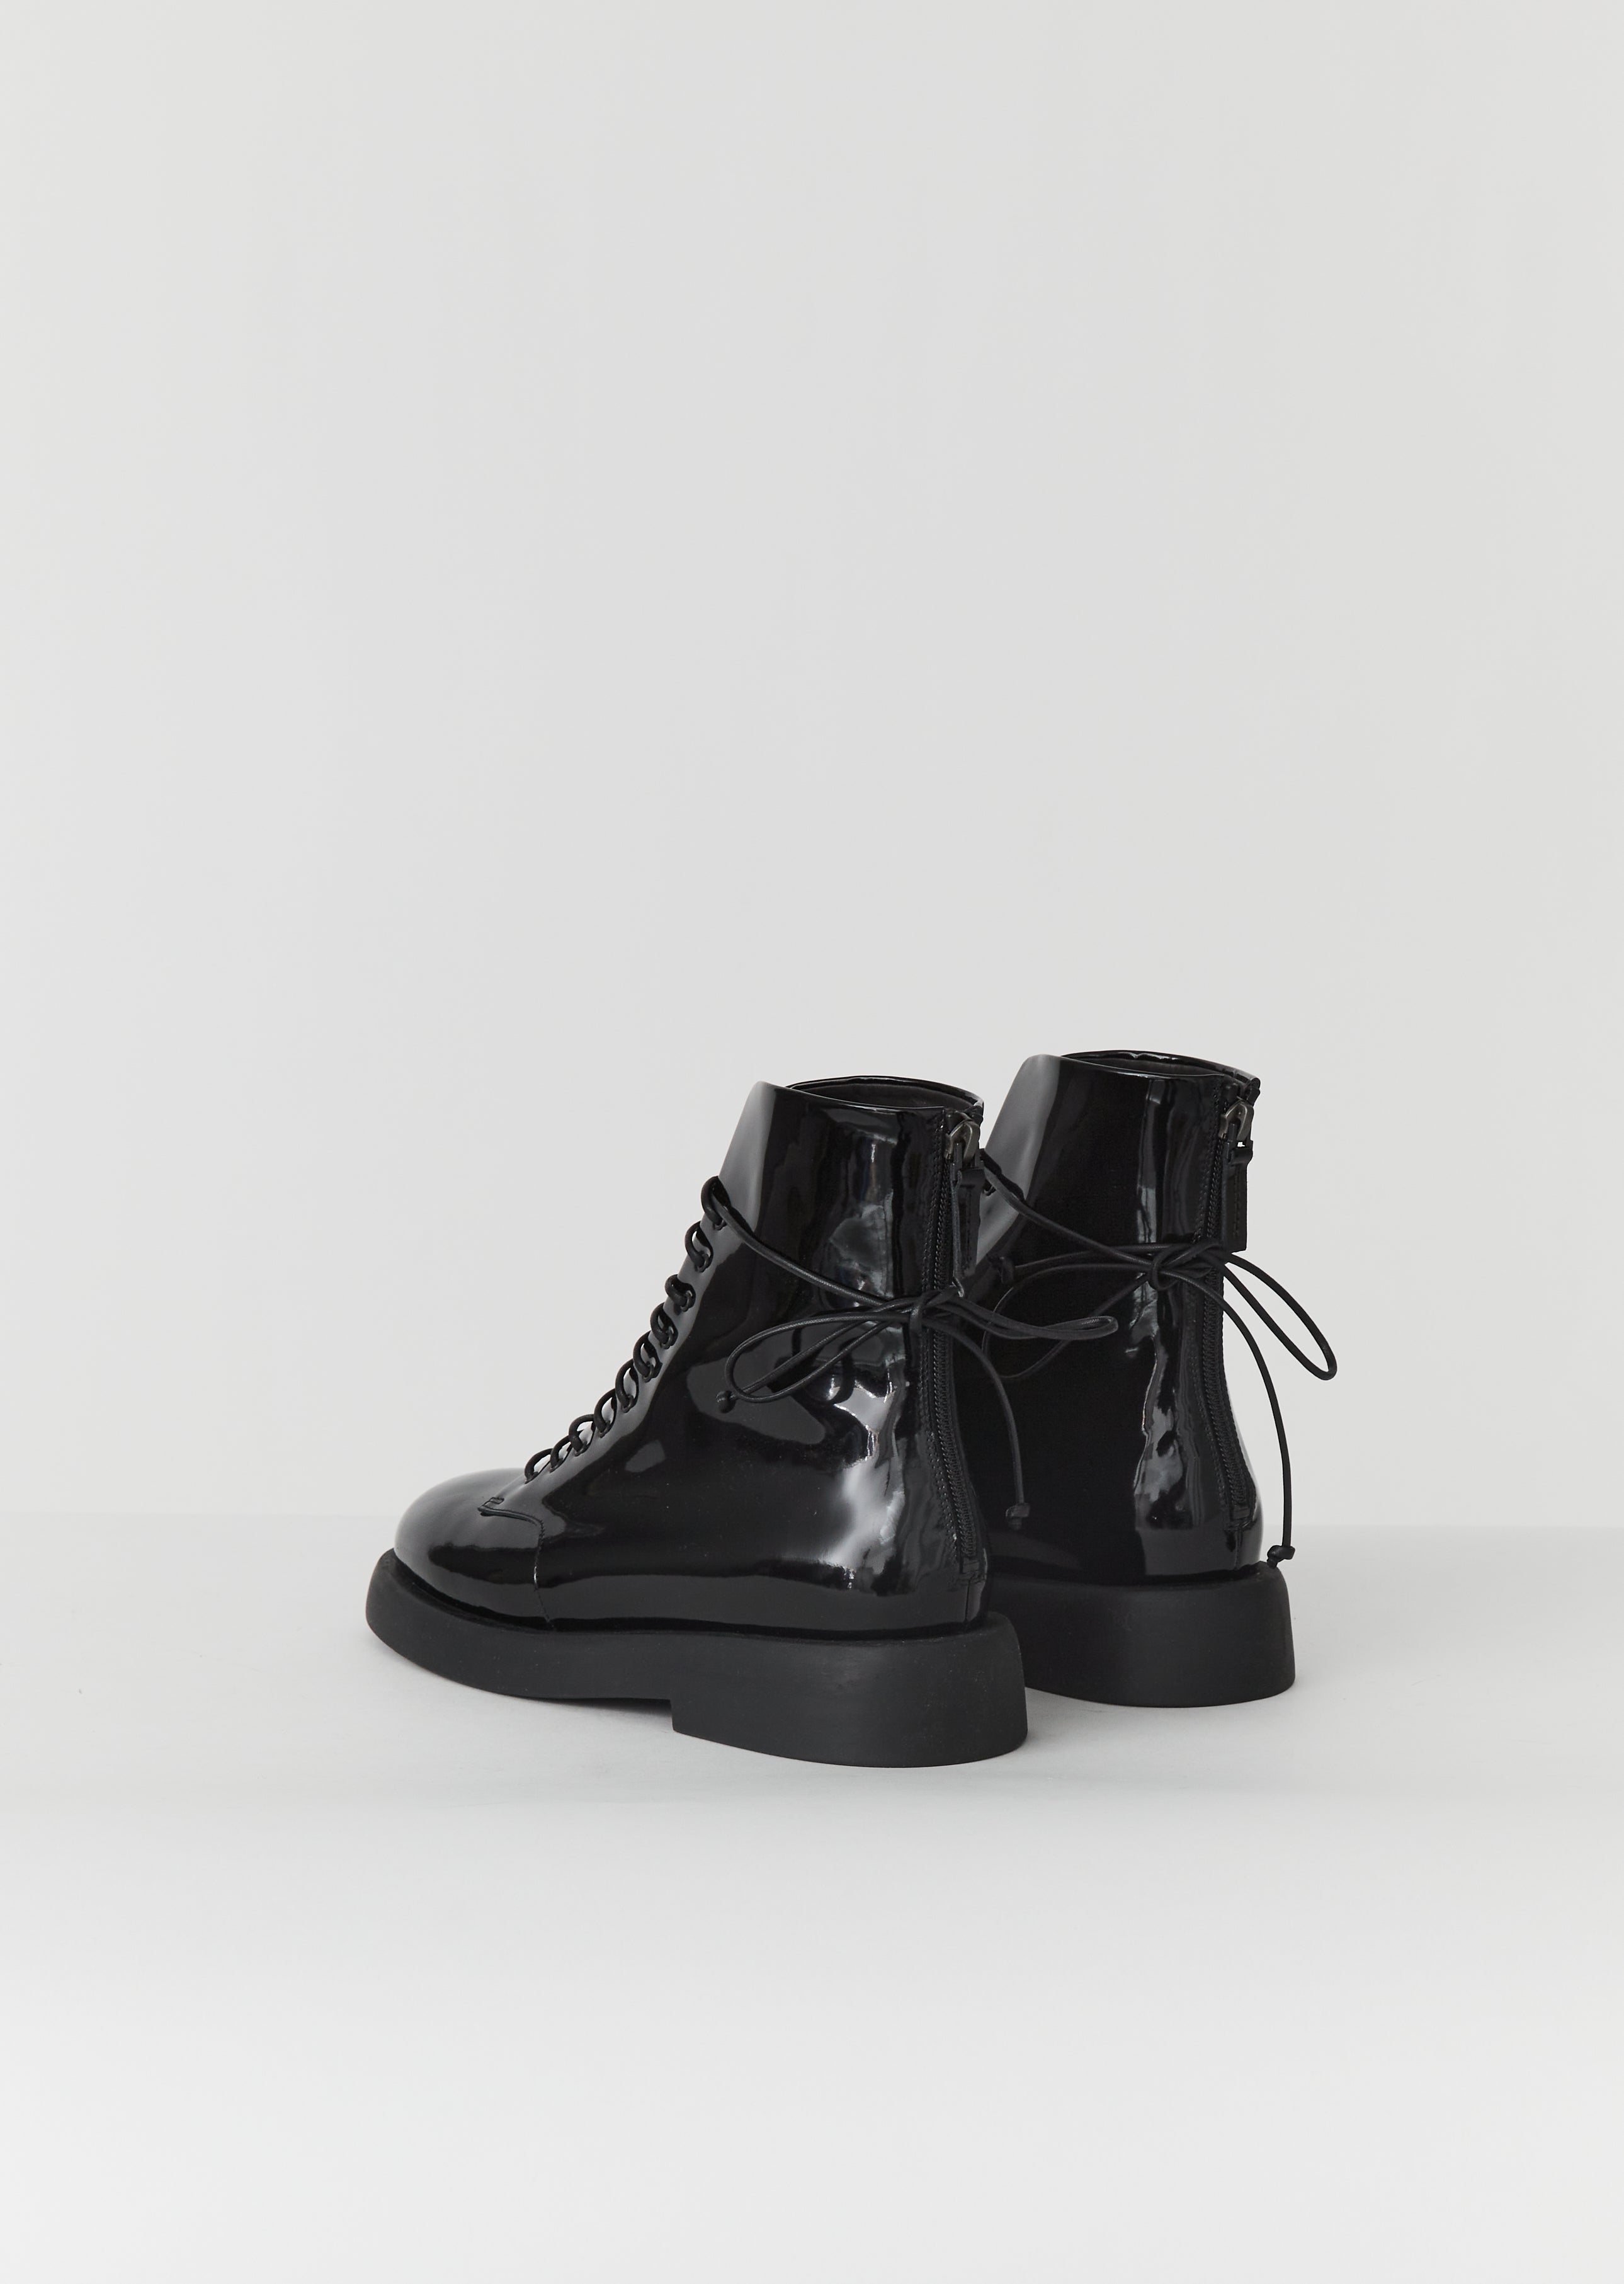 patent leather boots black